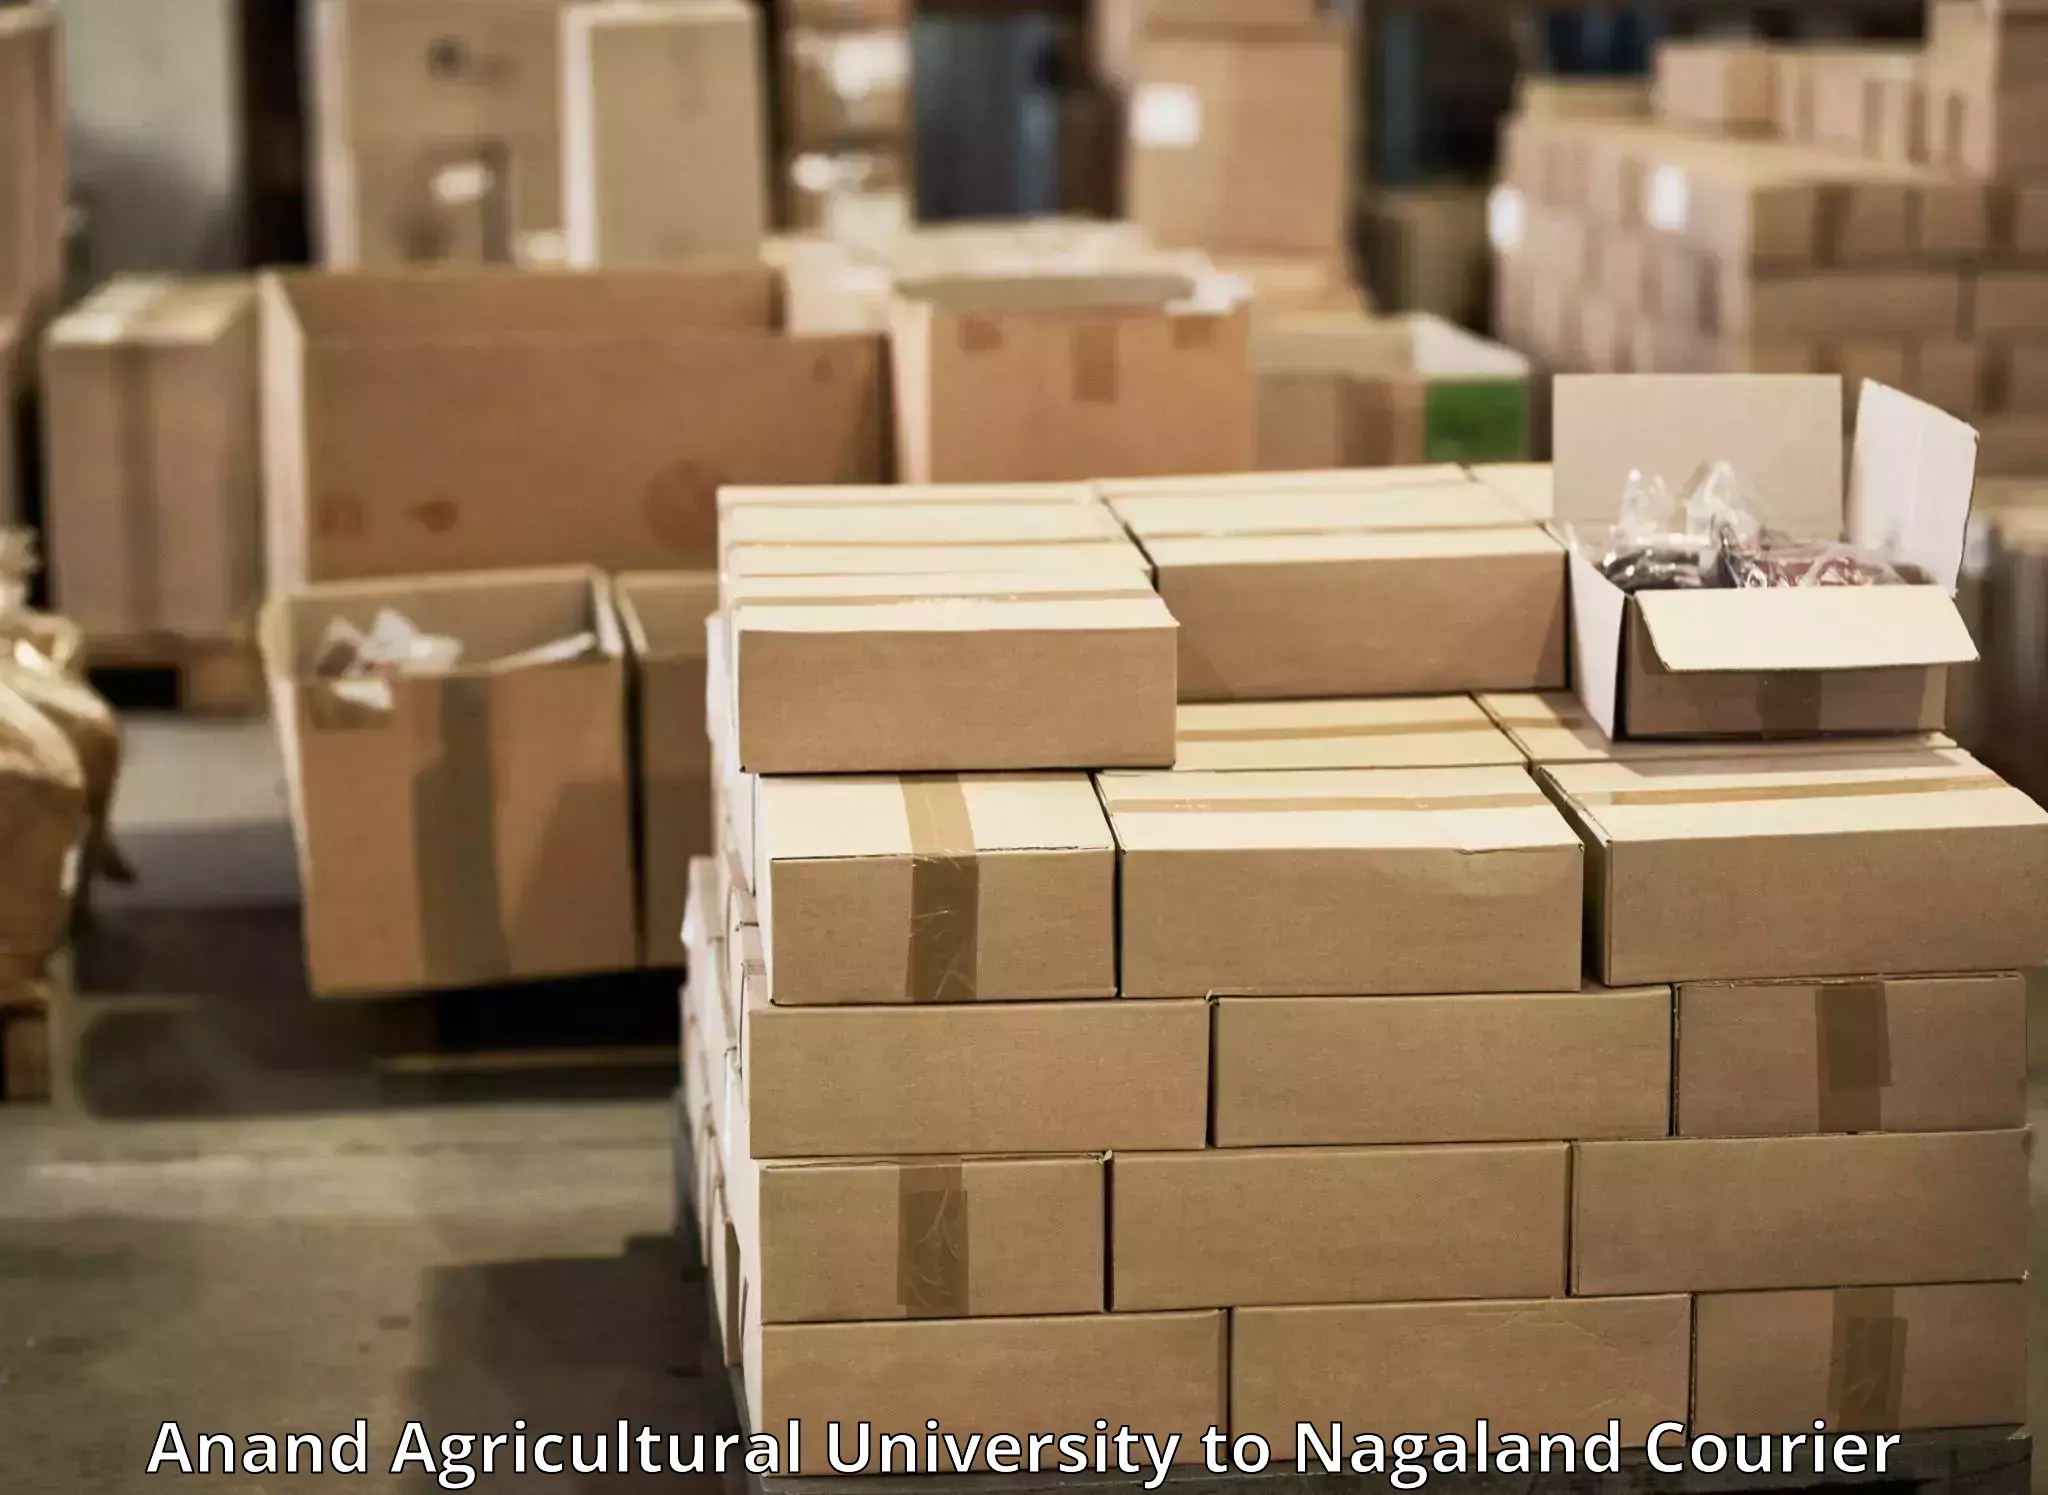 Efficient freight service Anand Agricultural University to Nagaland